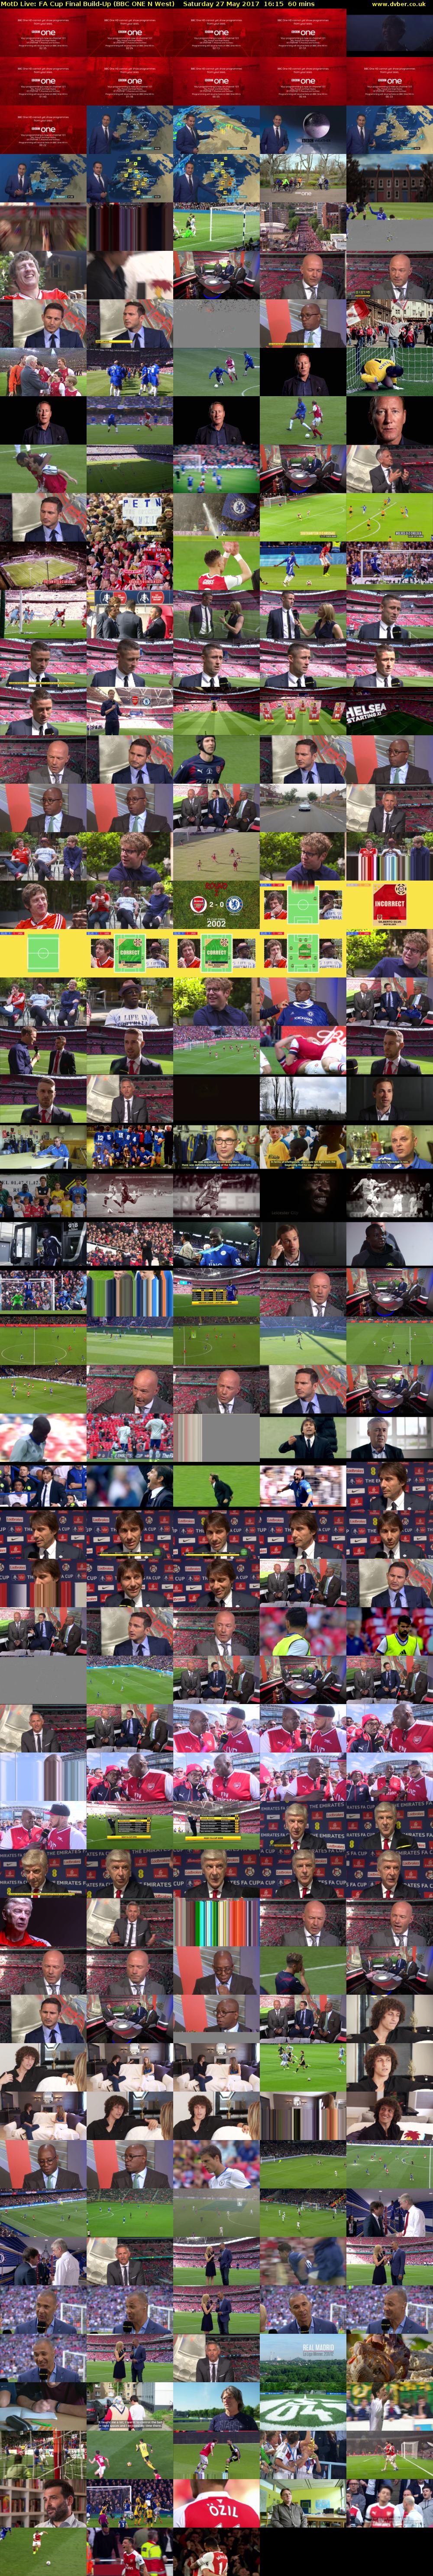 MotD Live: FA Cup Final Build-Up (BBC ONE N West) Saturday 27 May 2017 16:15 - 17:15